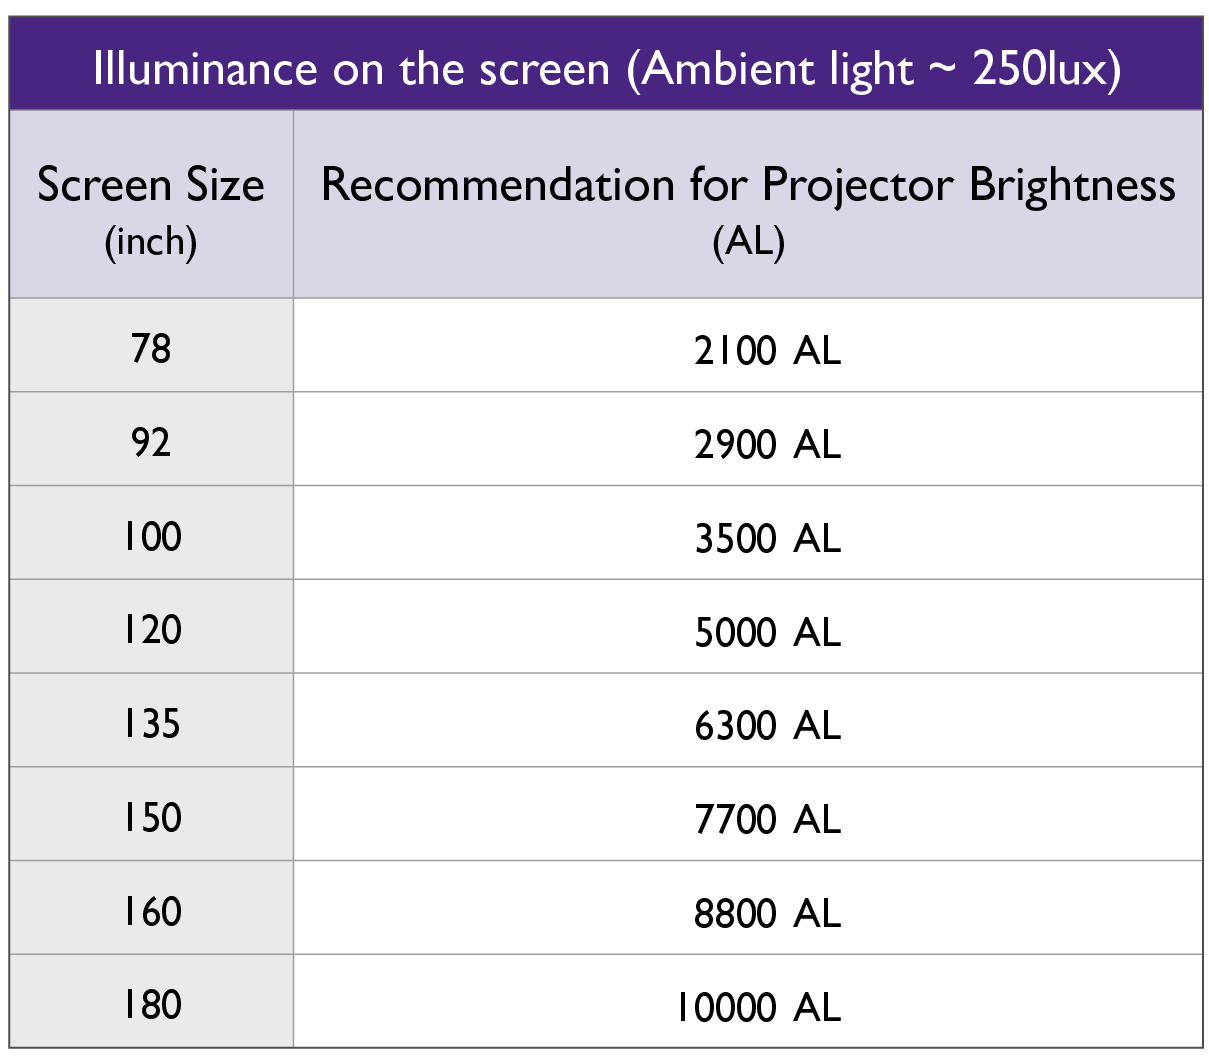 The table below lists the recommended brightness in lumens for a projector installed in a 250-lux ambient light setting based on screen size.